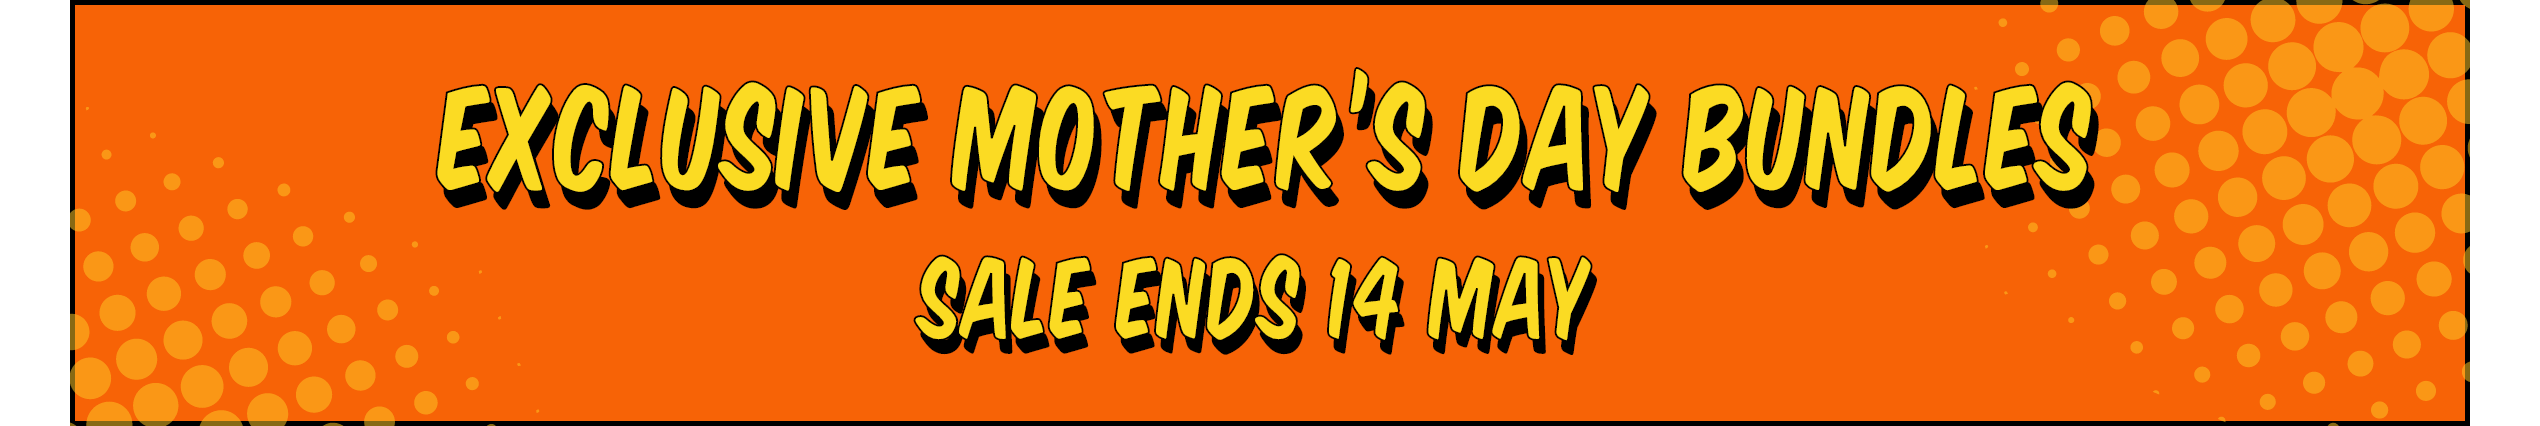 Exclusive Mother's Day Bundles, Sale Ends On May 14